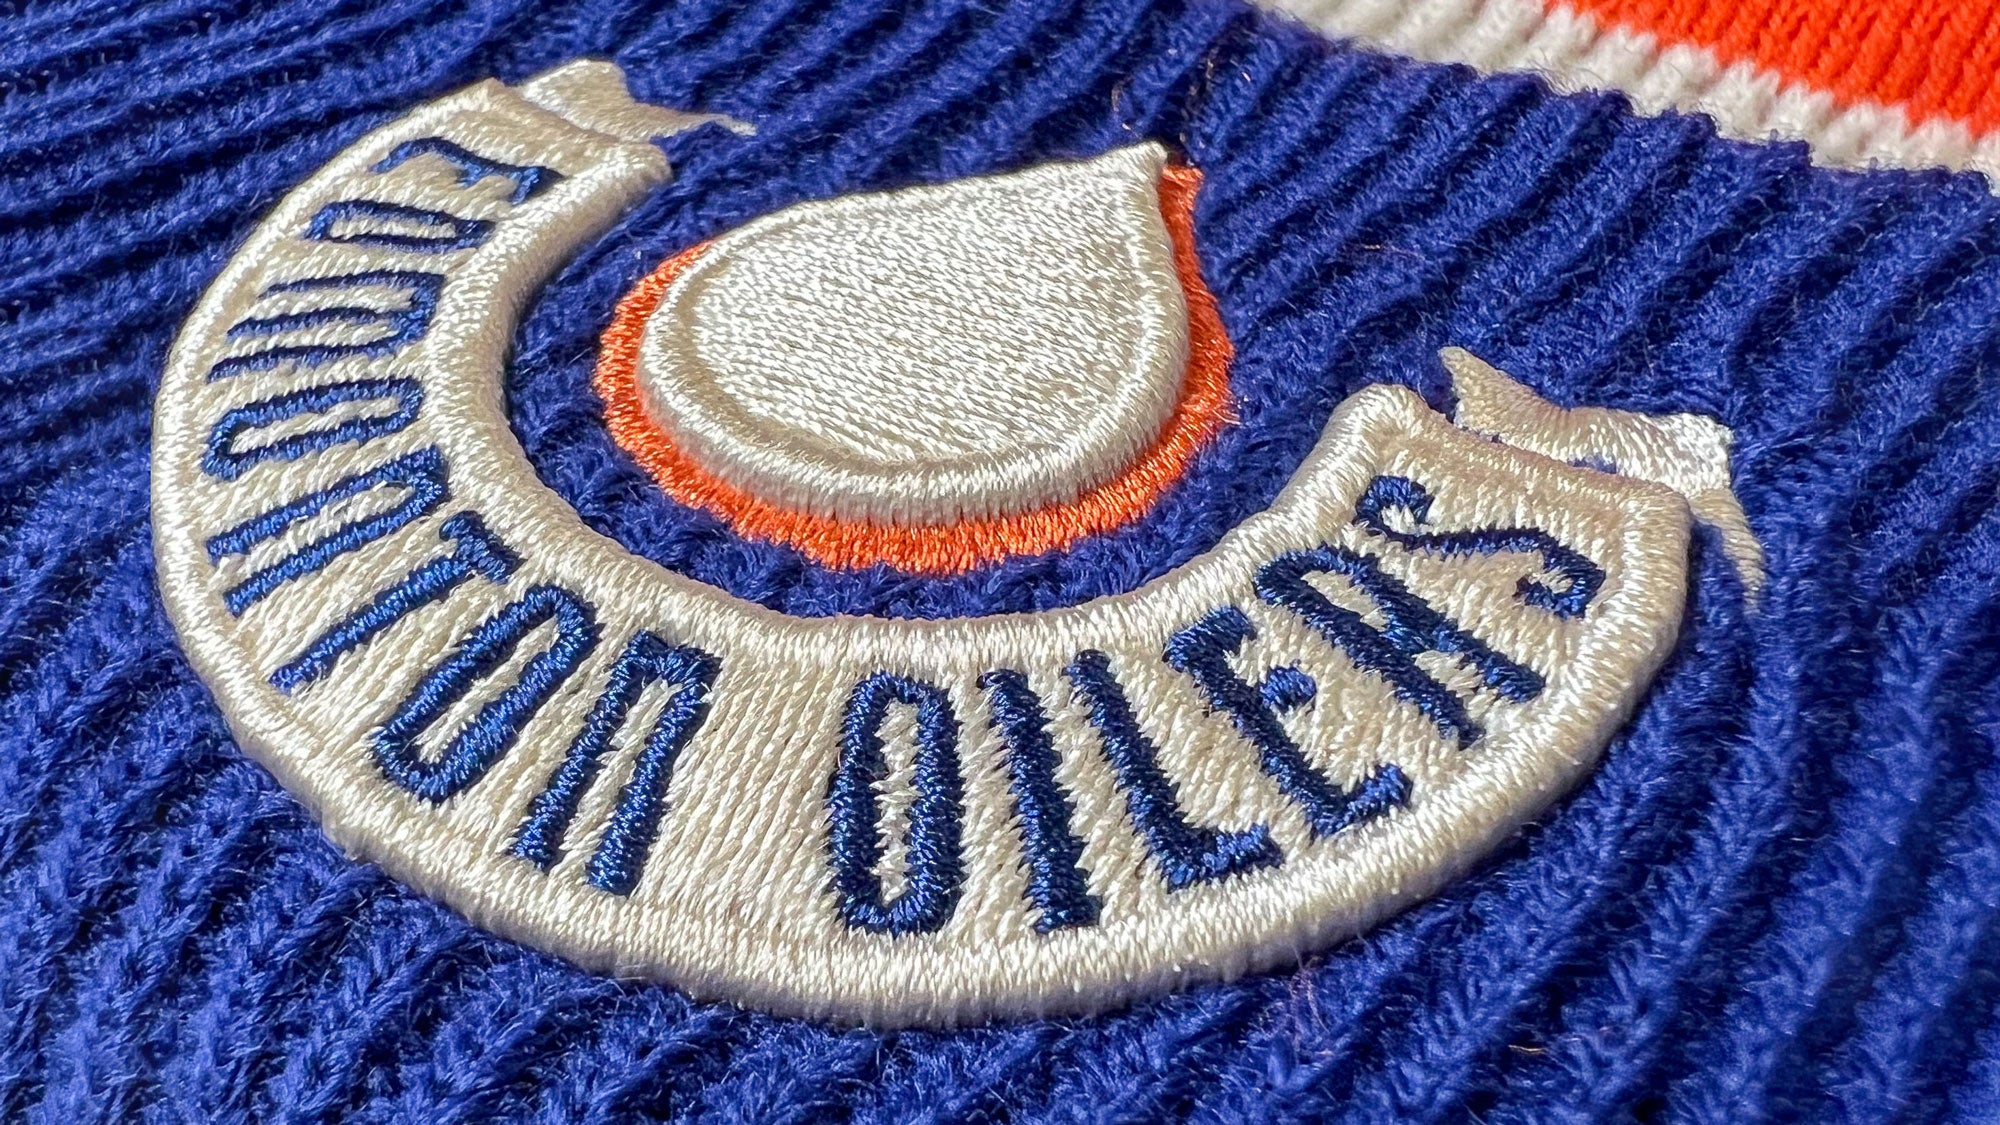 Edmonton Oilers Apparel, Oilers Clothing and Gear